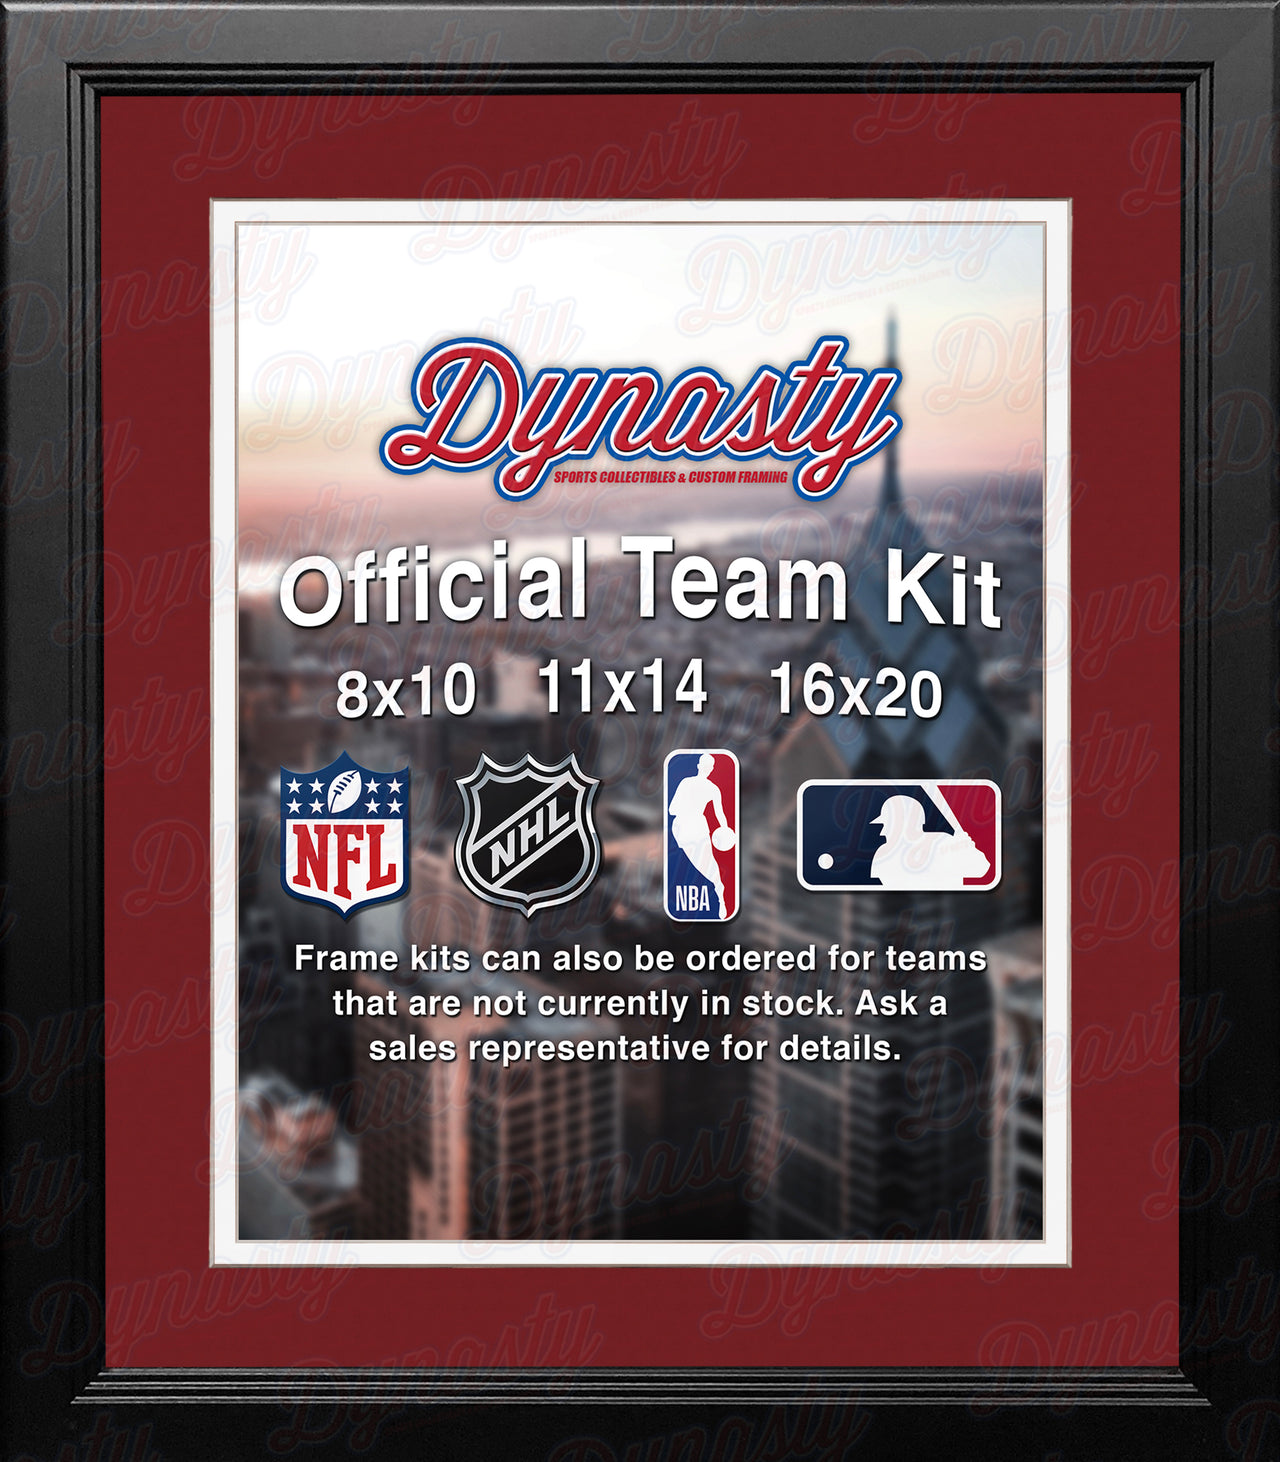 NHL Hockey Photo Picture Frame Kit - Detroit Red Wings (Red Matting, White Trim) - Dynasty Sports & Framing 